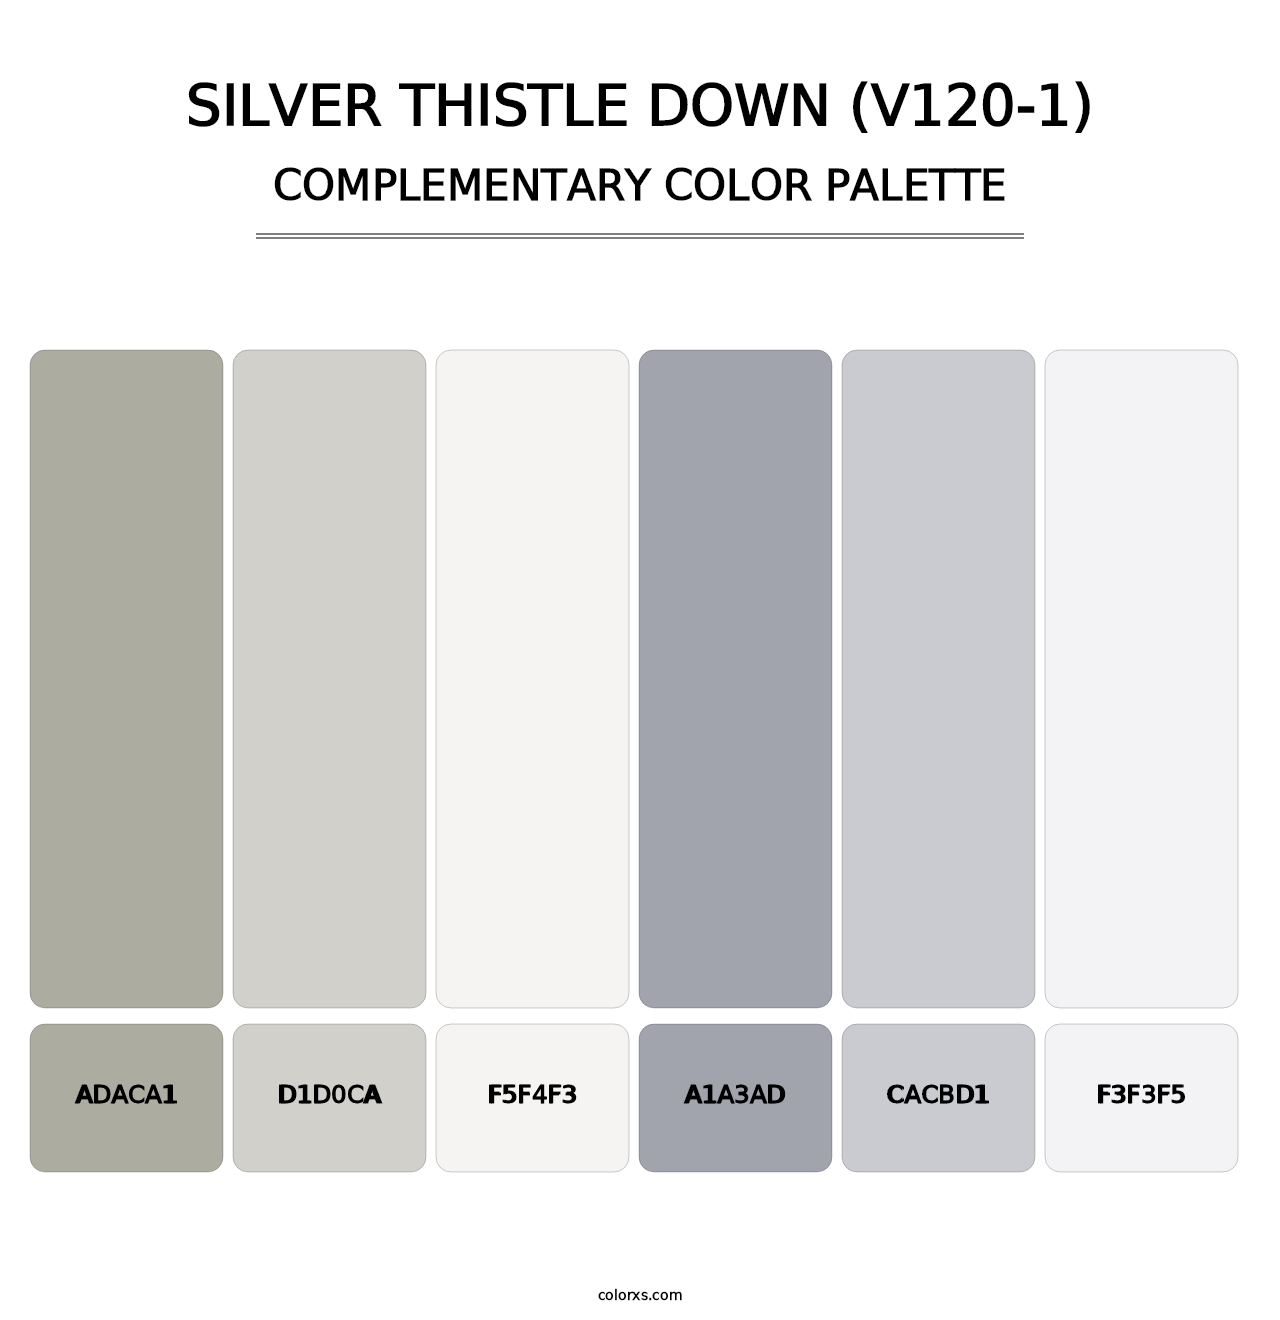 Silver Thistle Down (V120-1) - Complementary Color Palette